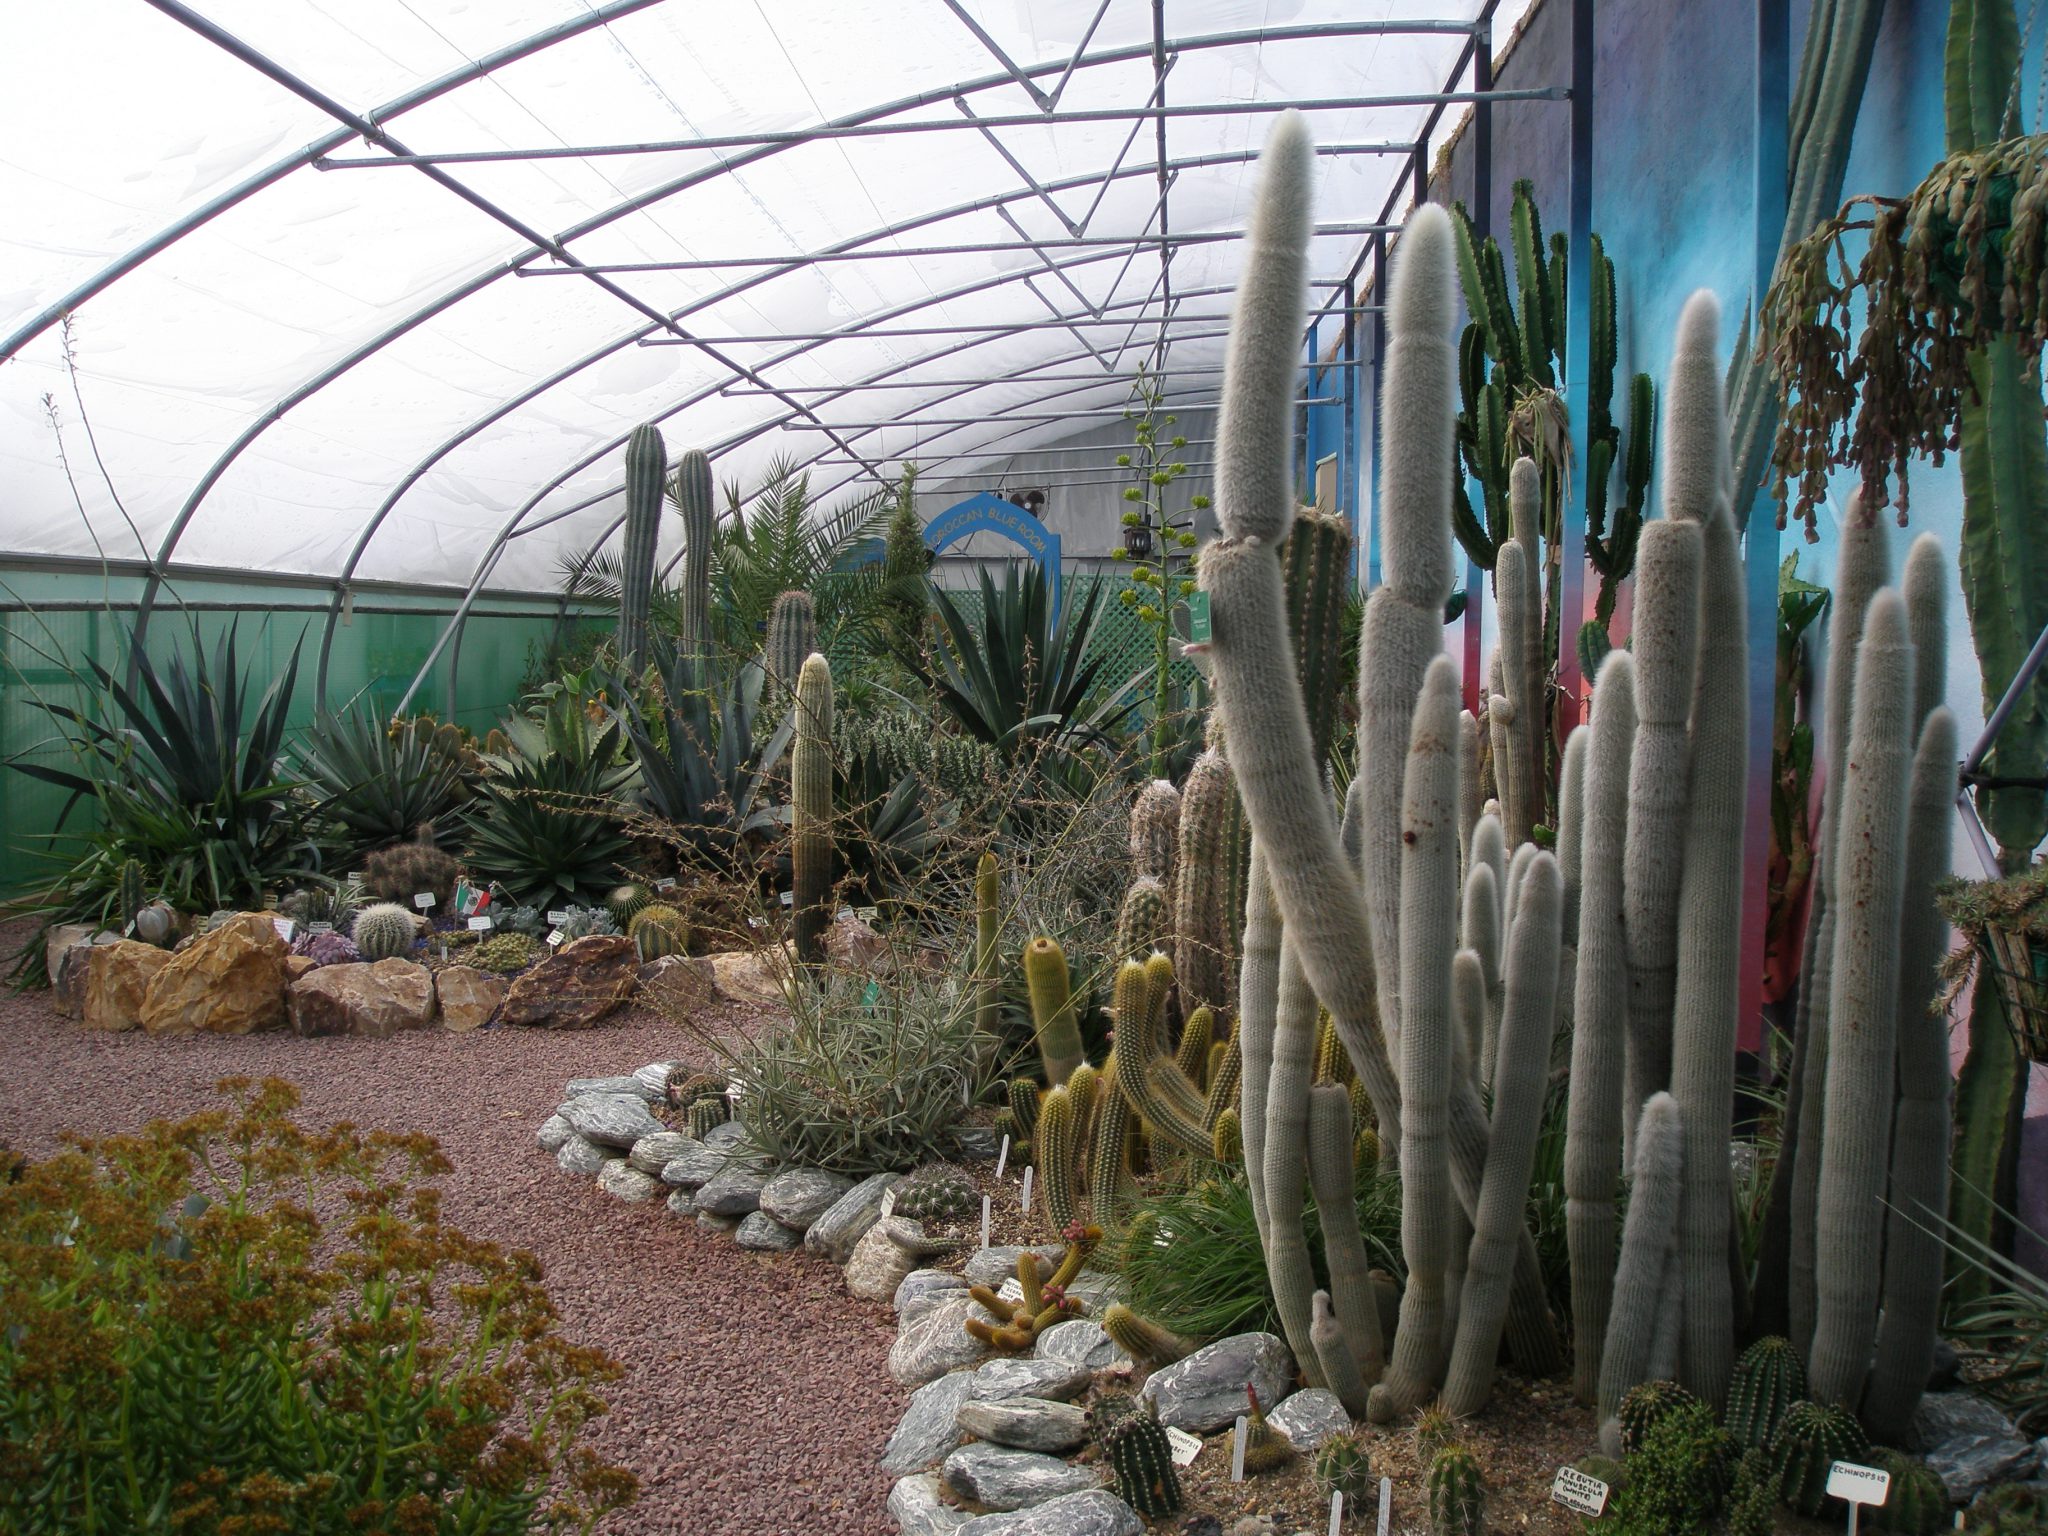 The Hot & Spikey Greenhouse is just west of The World Garden beds, and contains plants that wouldn't have a prayer of surviving outside, over England's winters.